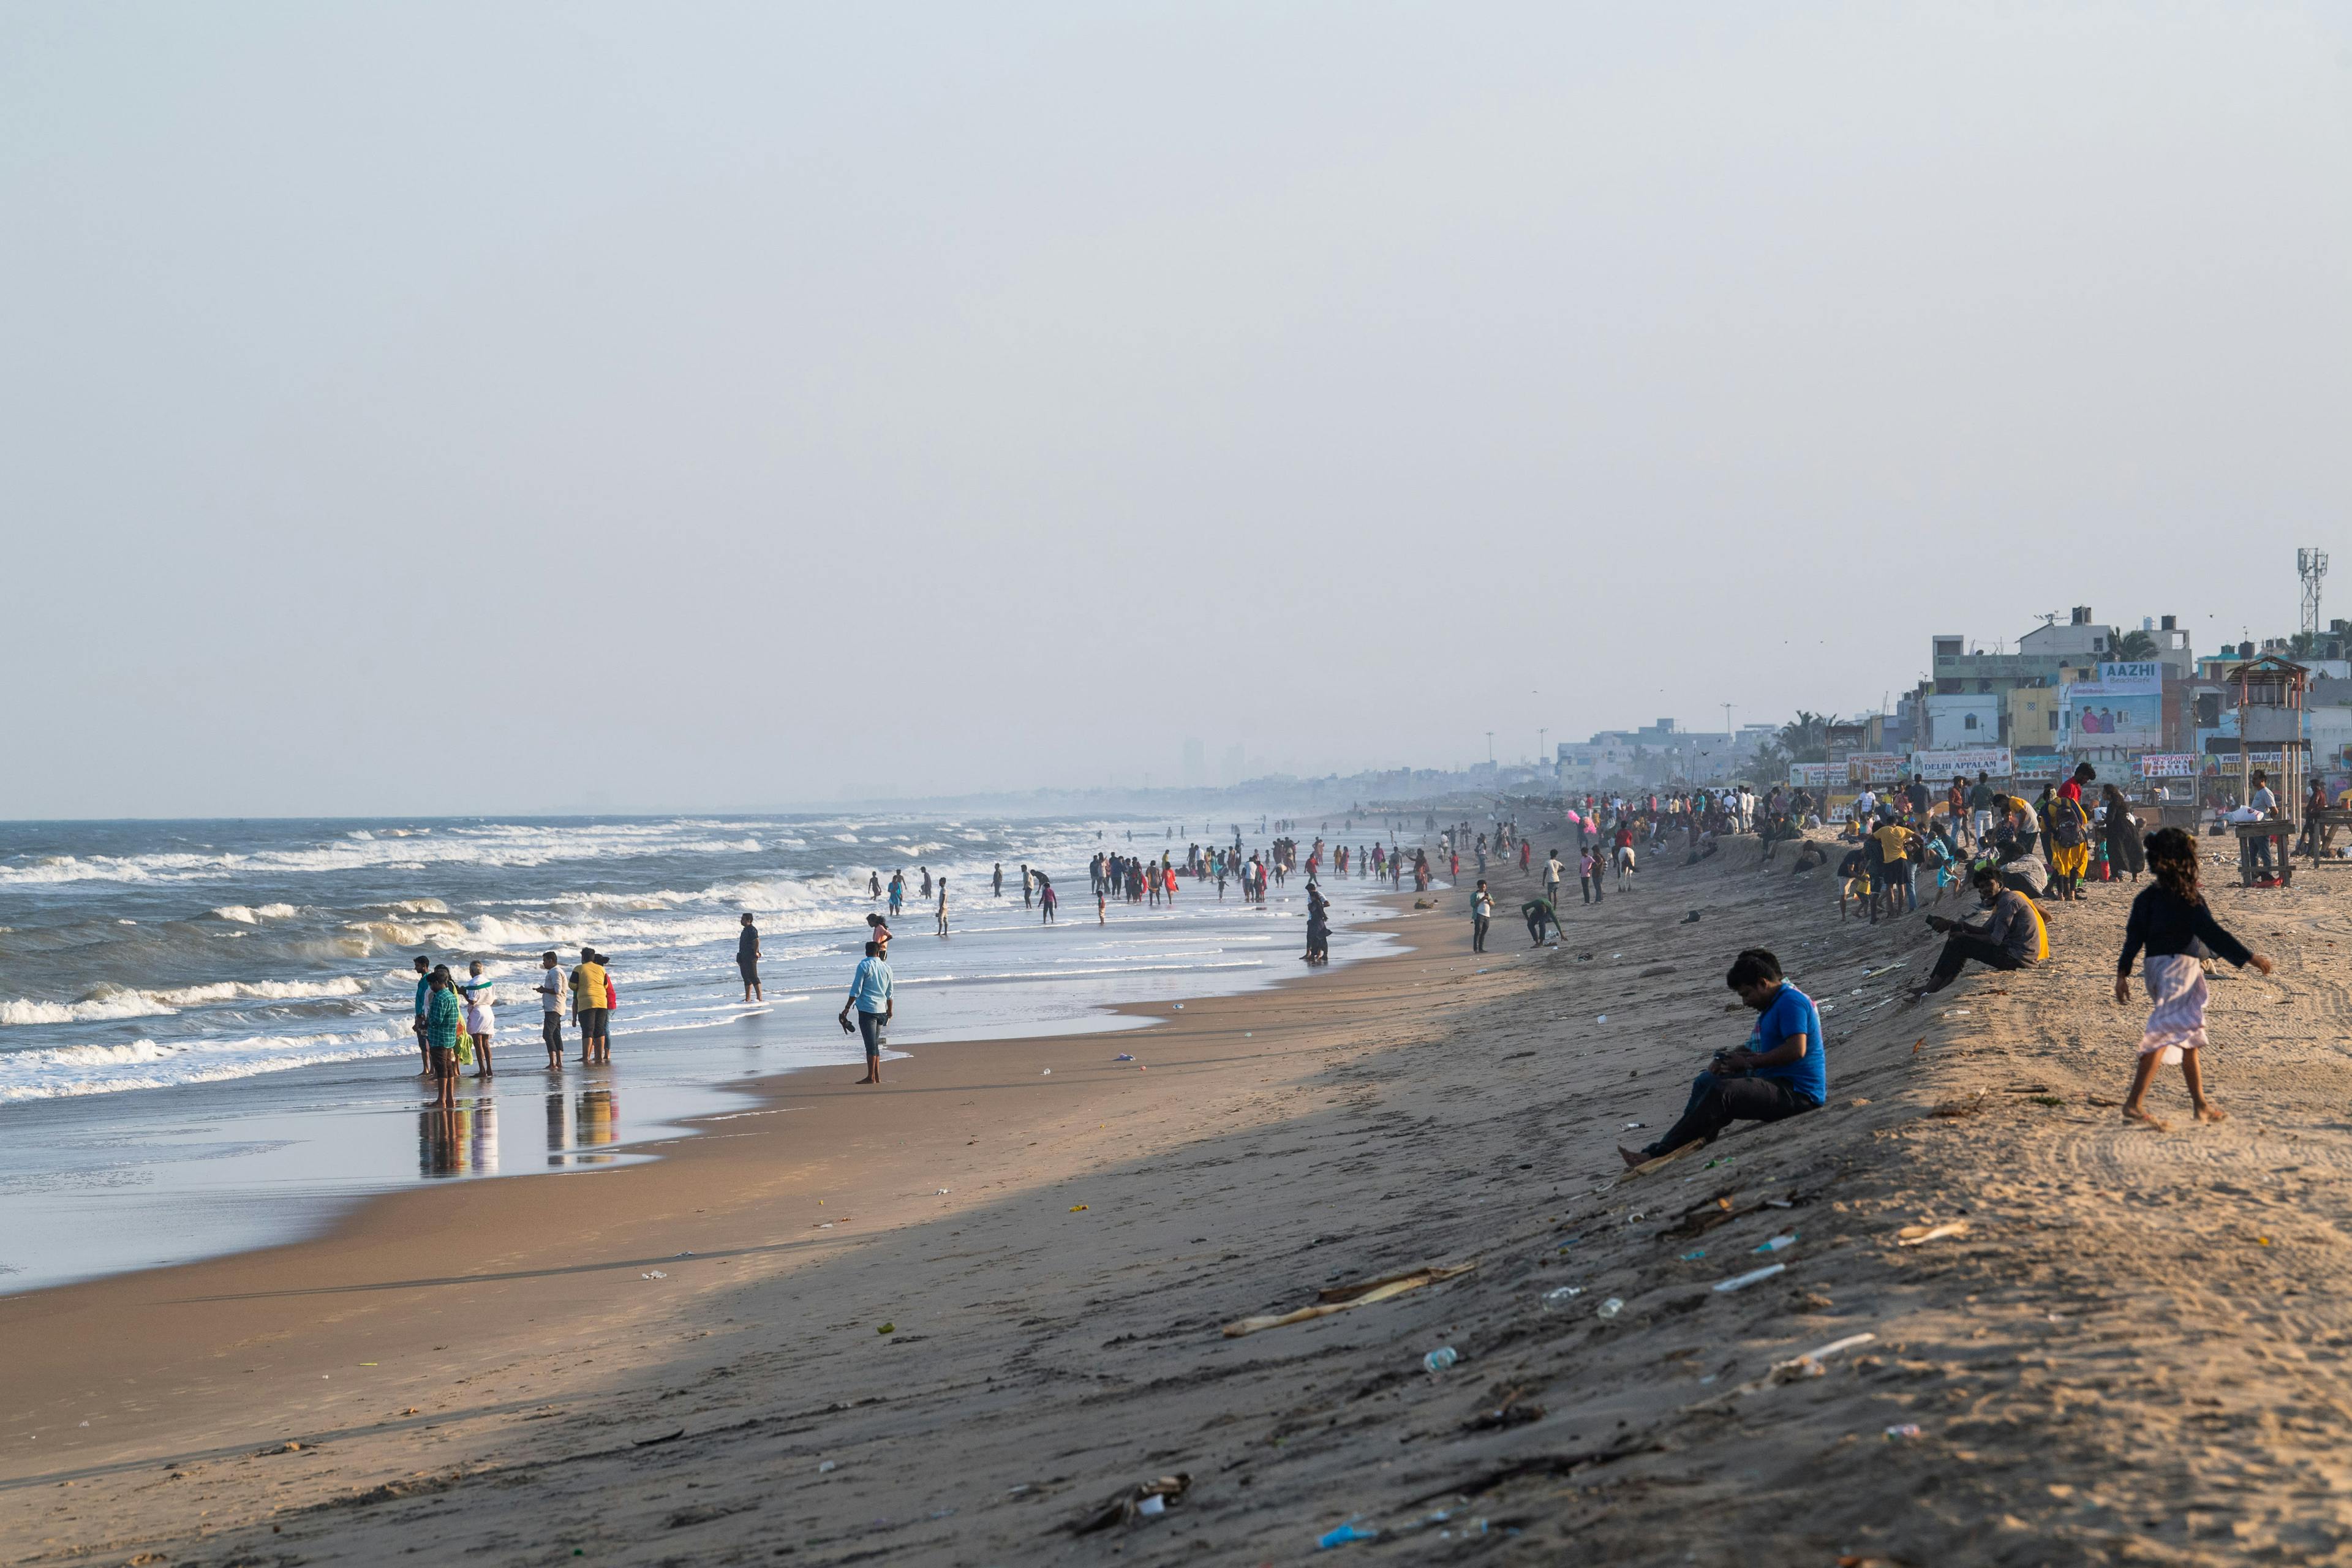 Daytime image of an overcast beach with people all around in India. A line of litter can be seen lining the beach.